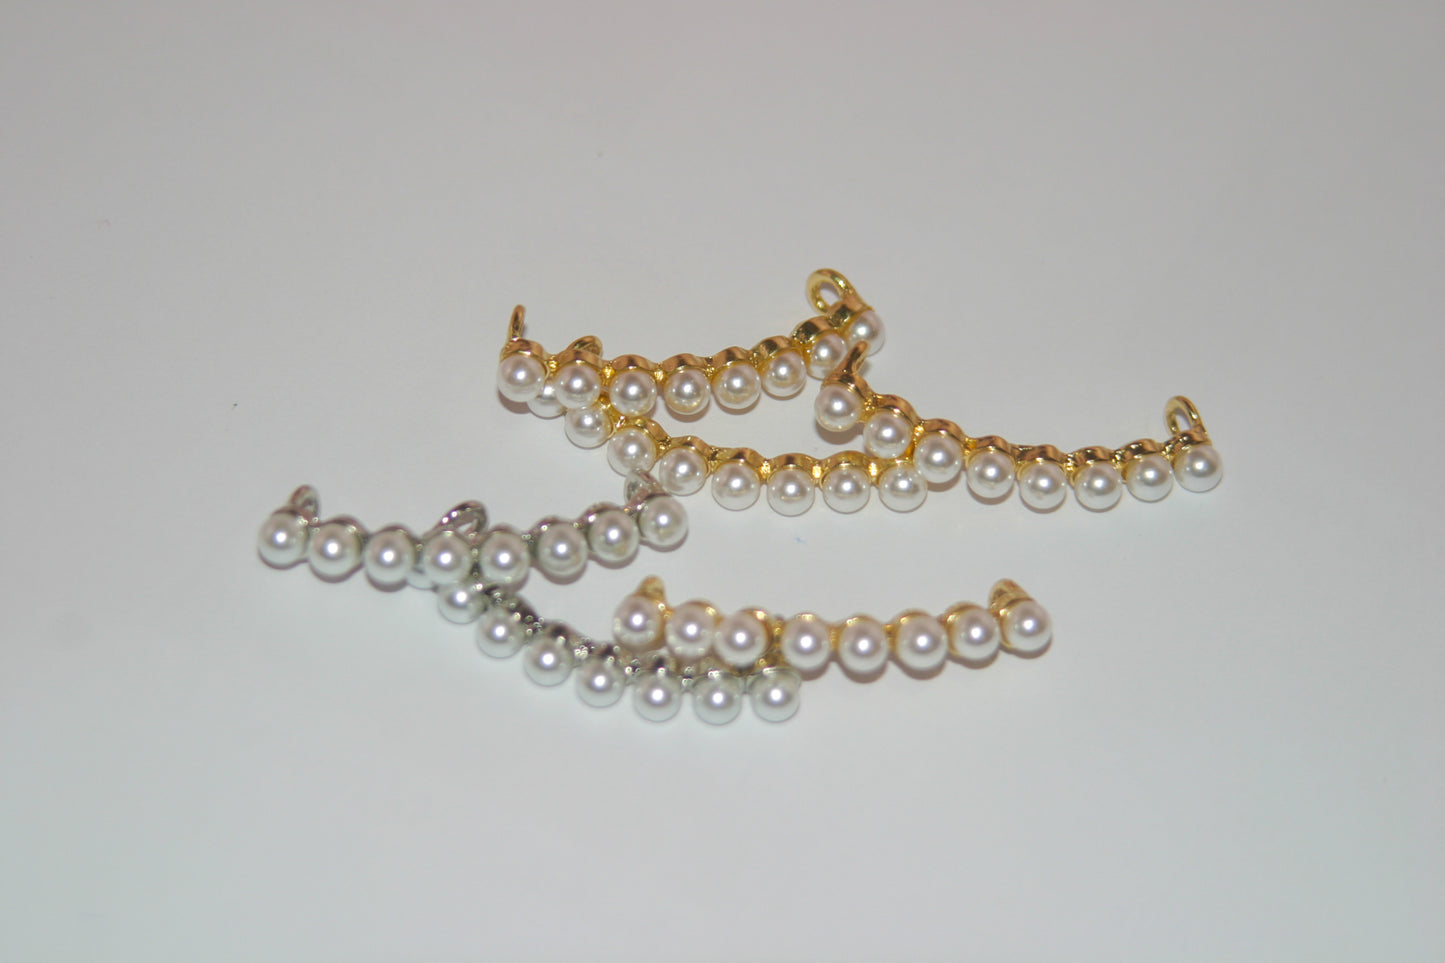 Gold and Silver Shoe Lace Charms